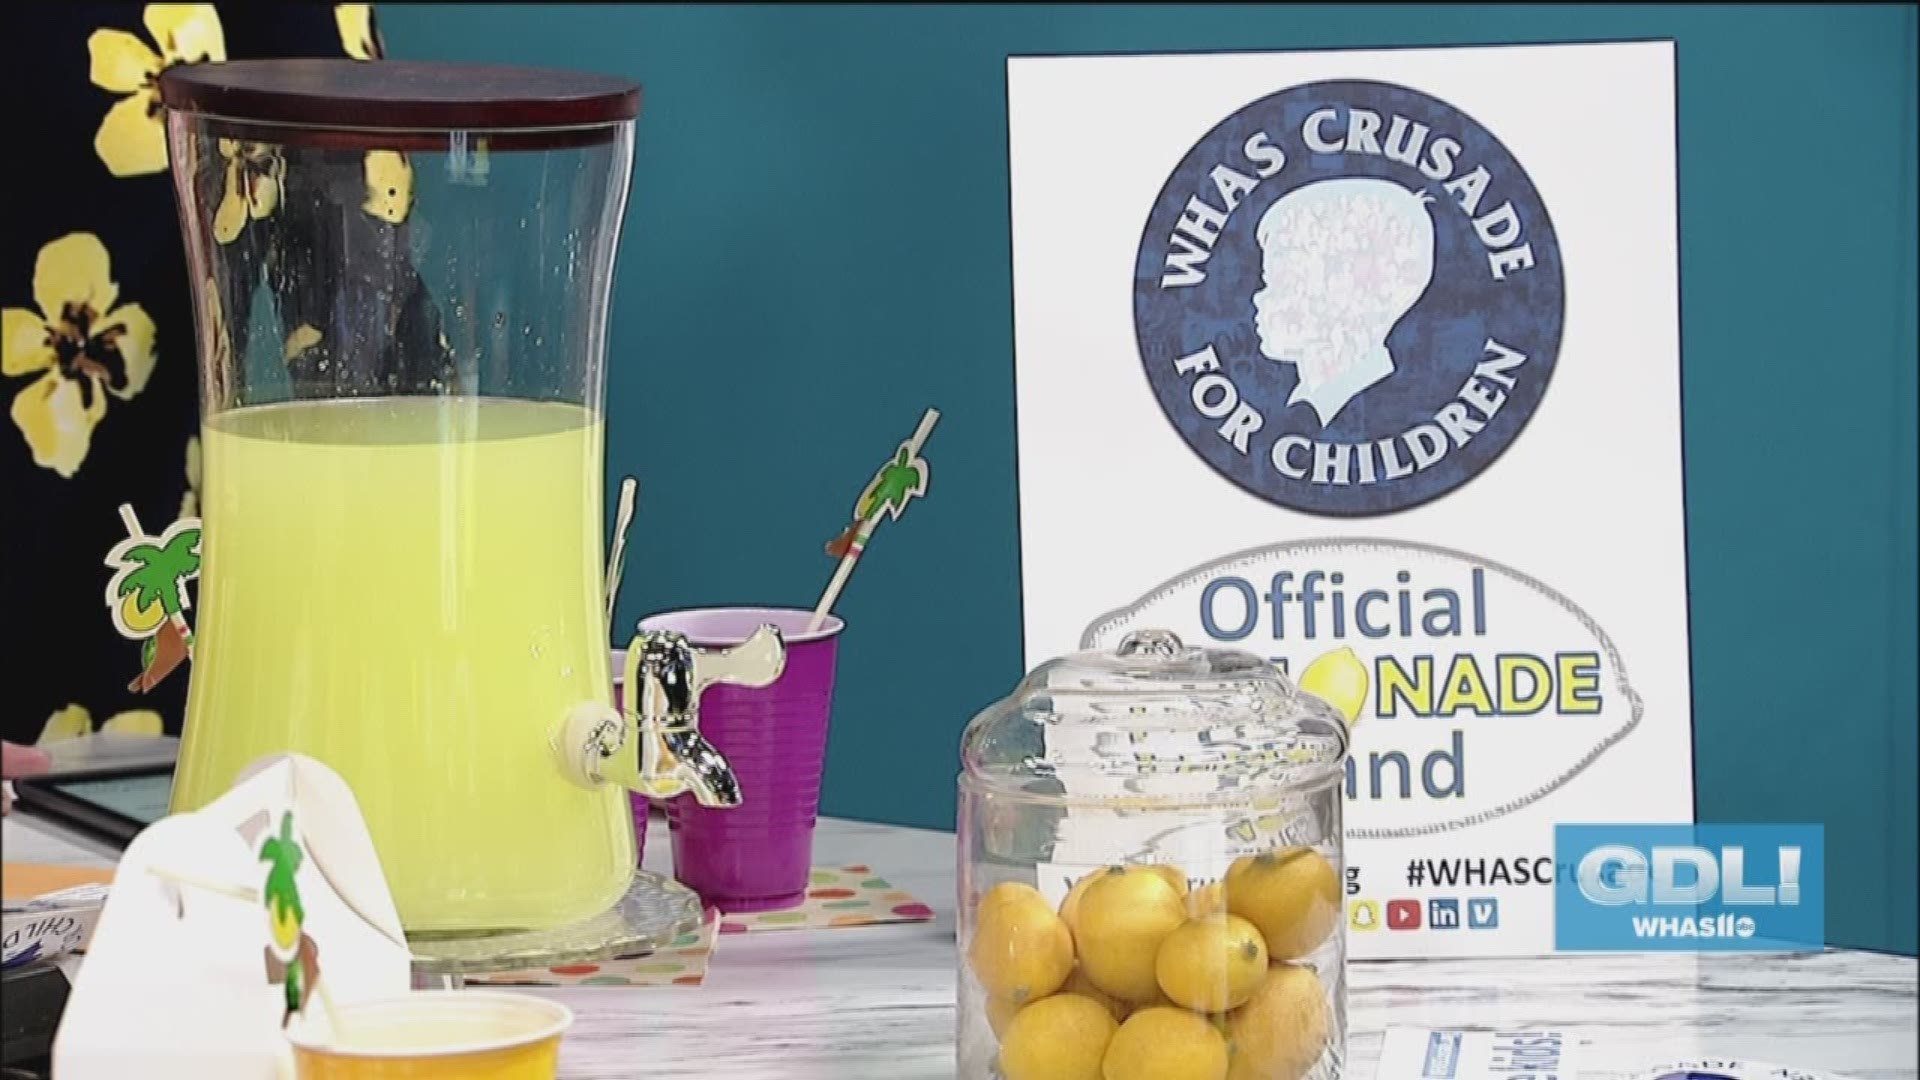 If you want to set up your own lemonade stand for the WHAS Crusade for Children, you can find details on WHASCrusade.org or call 582-7706.